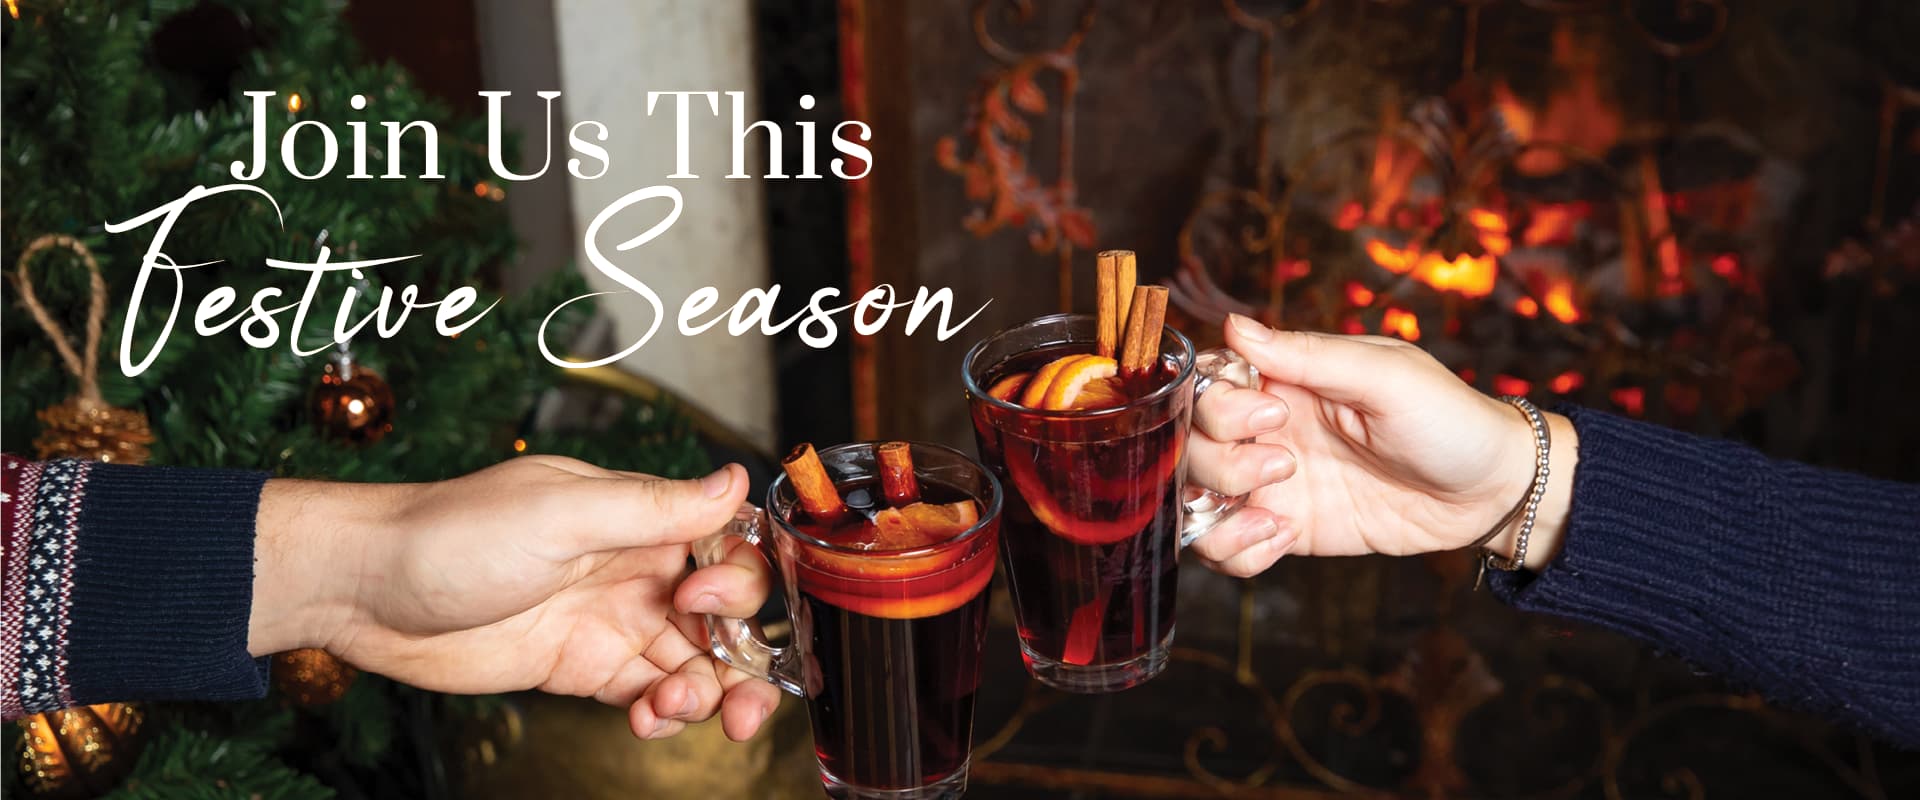 join us this festive season at Kings Head | Mulled Wine